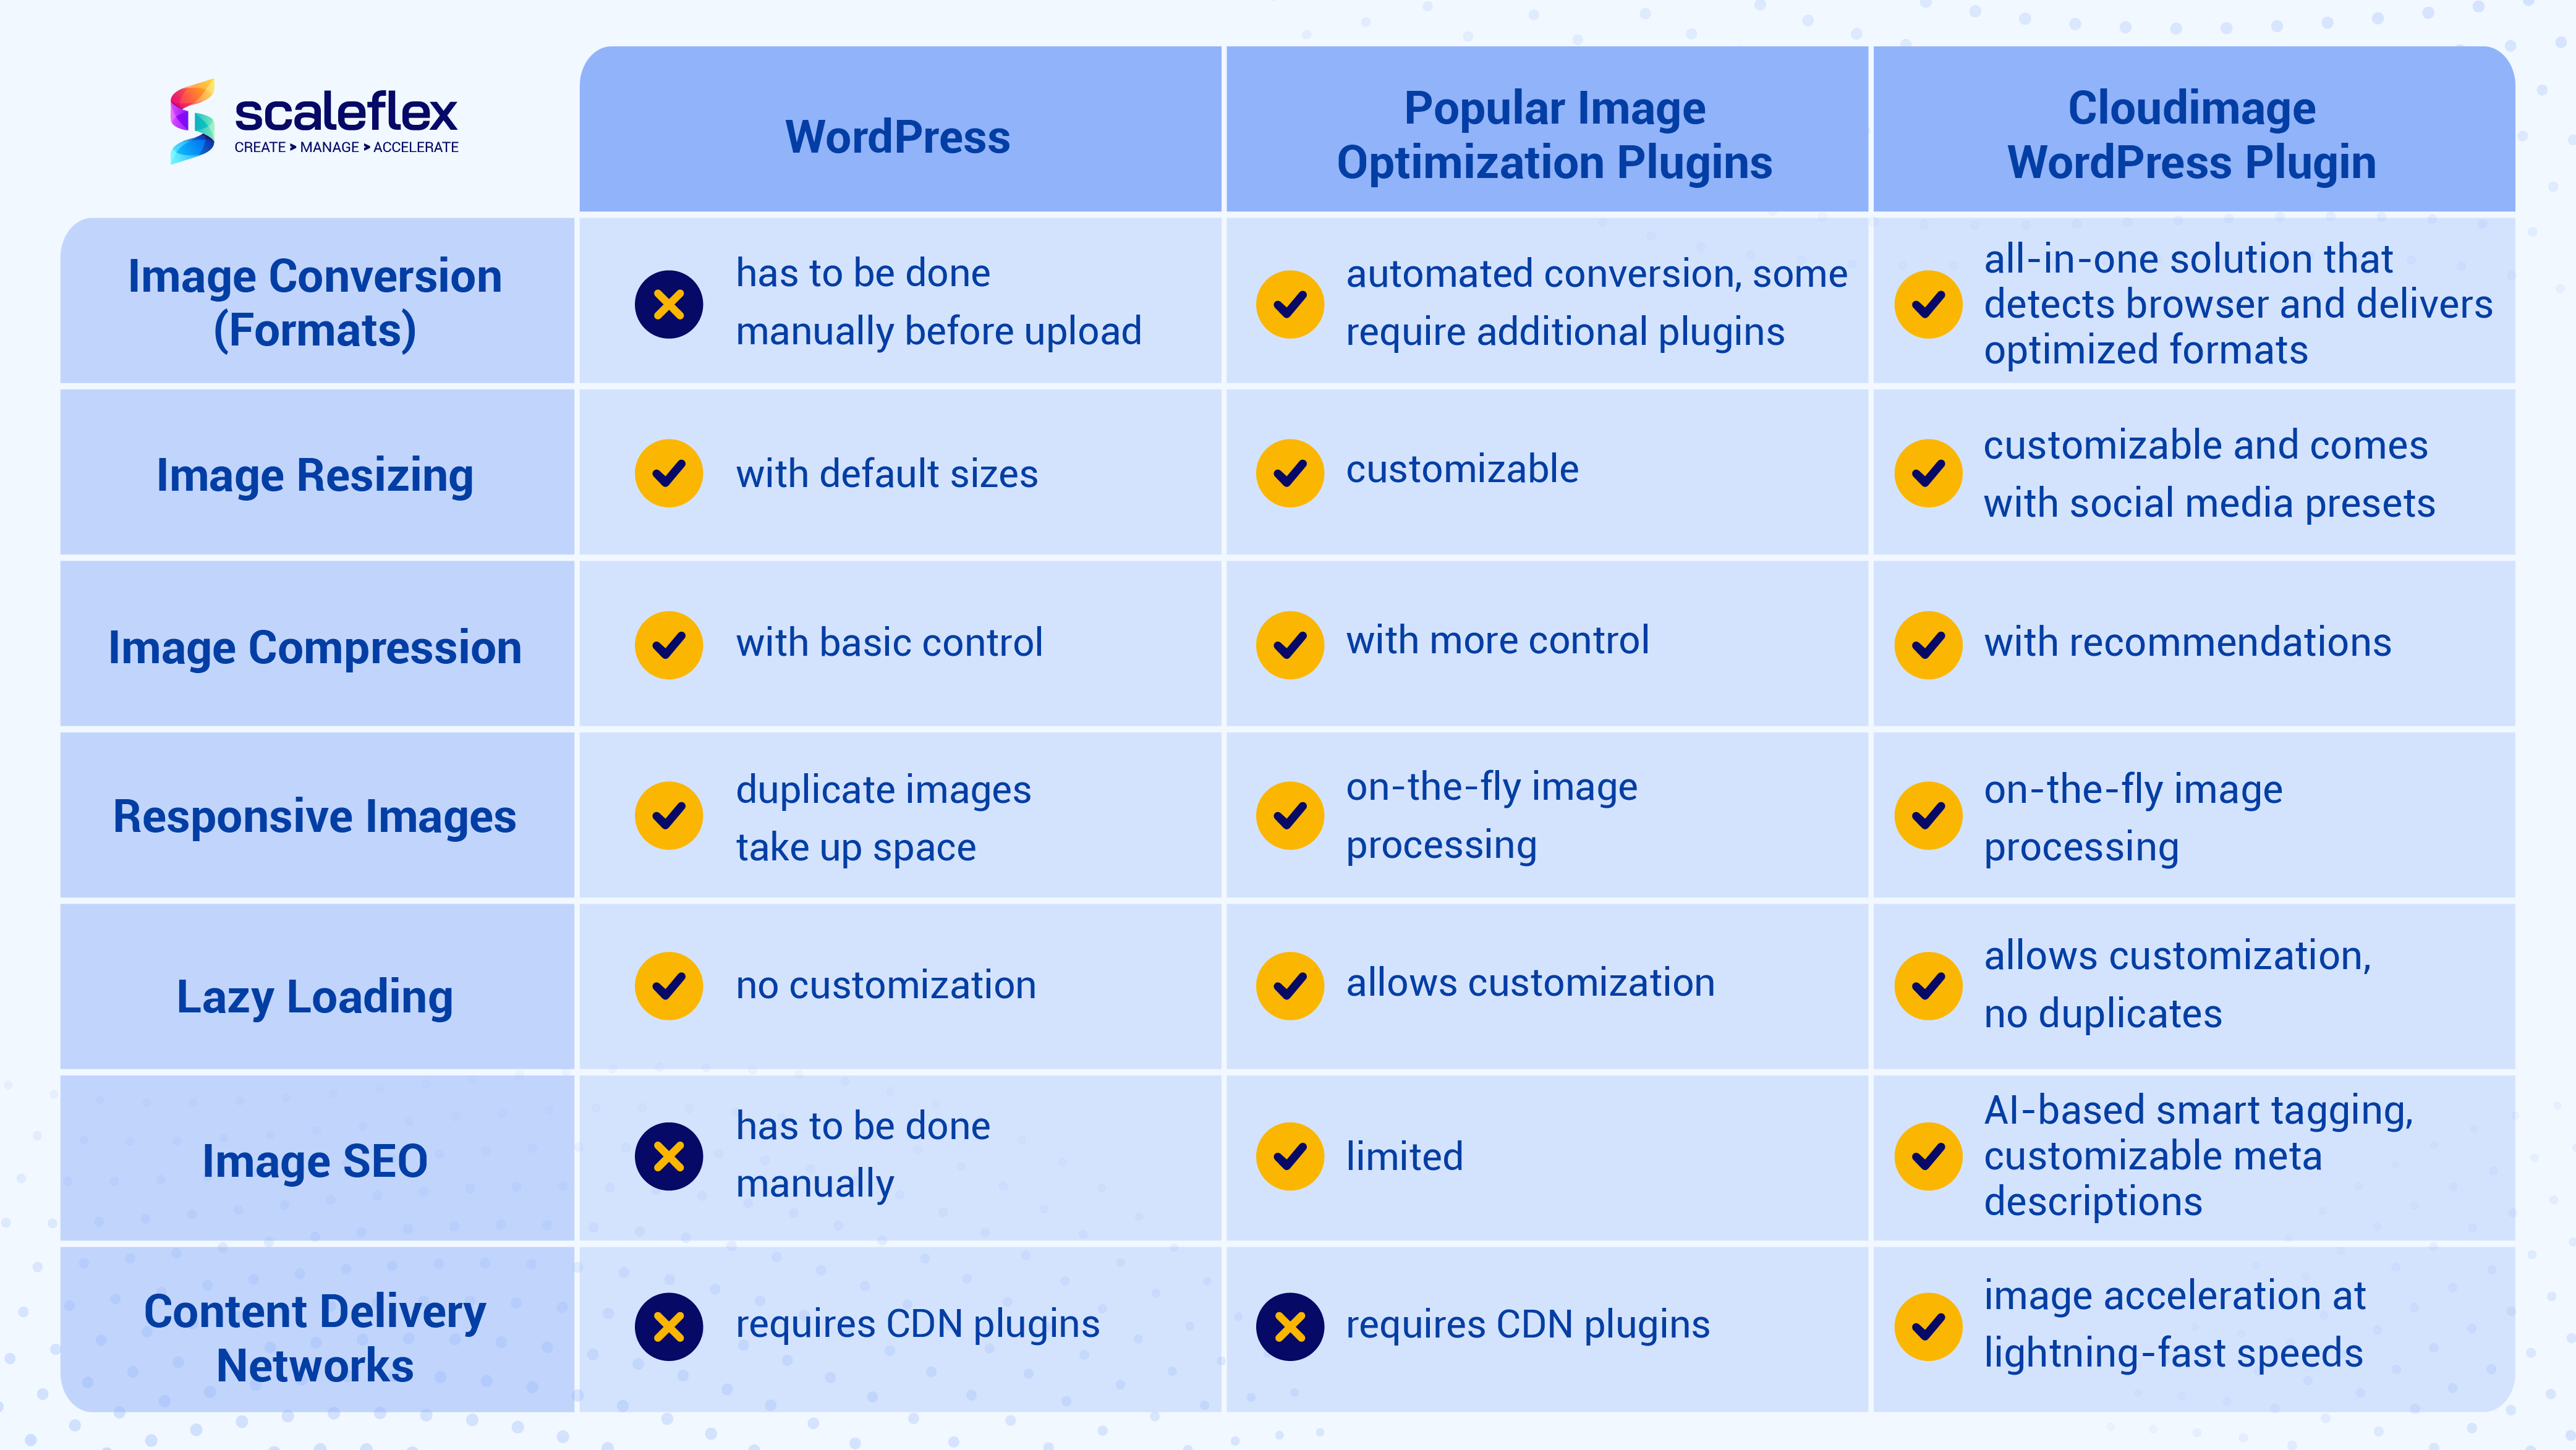 A Comparison of the Plugins can provide for Image Optimization